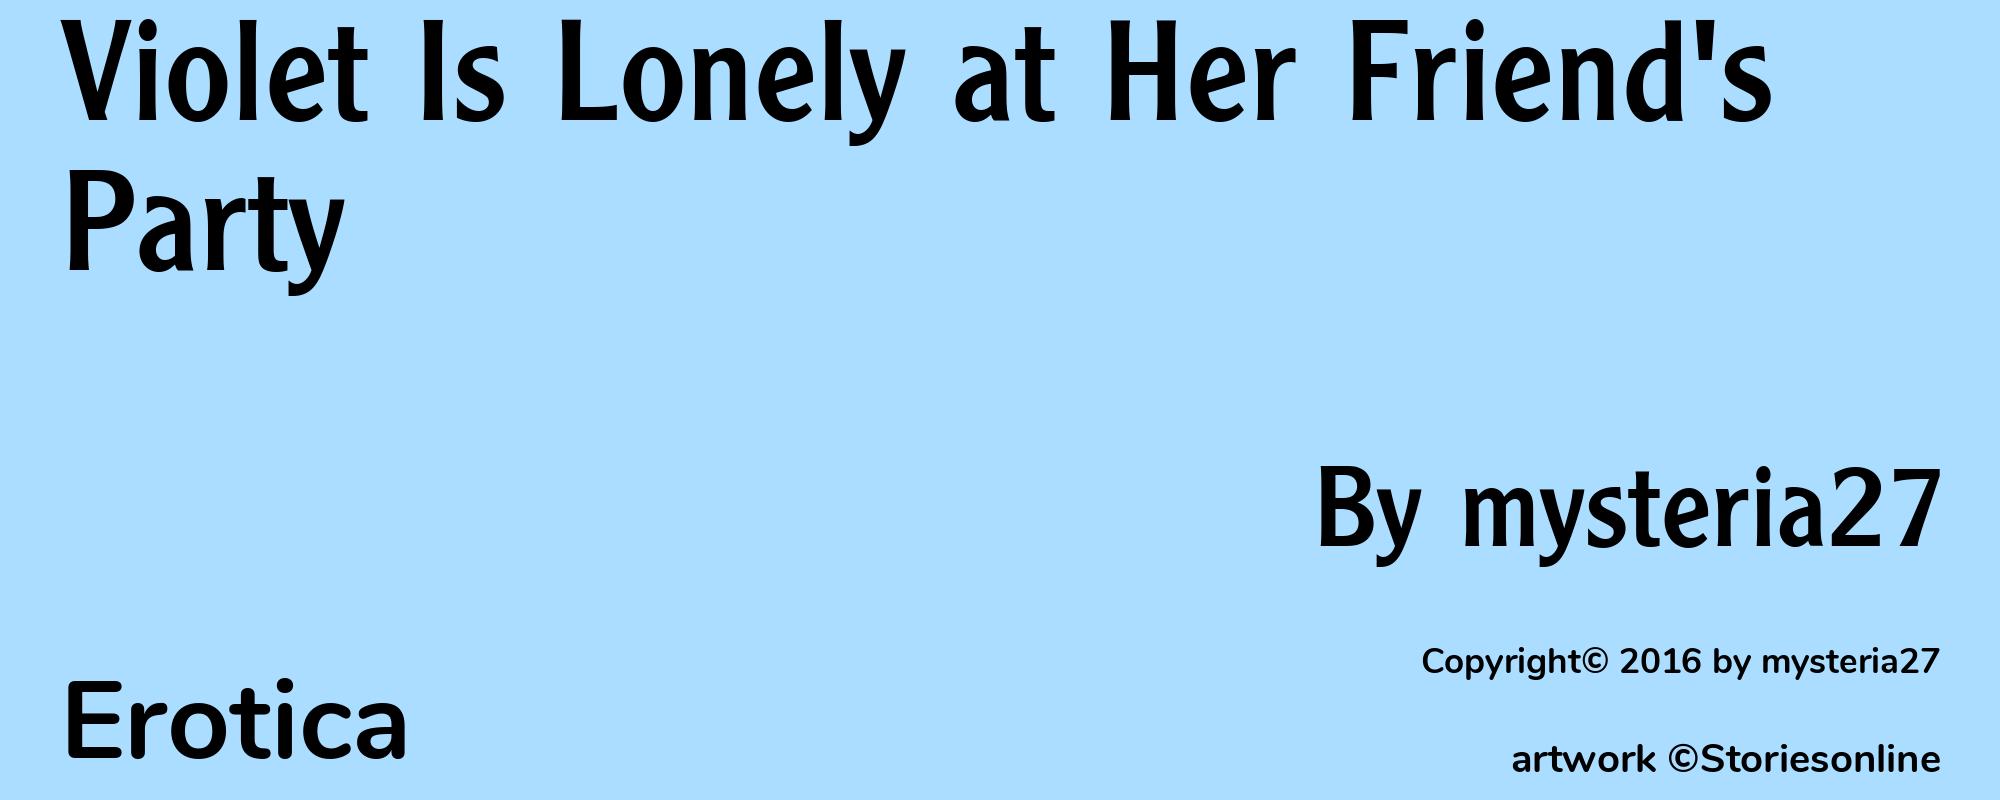 Violet Is Lonely at Her Friend's Party - Cover